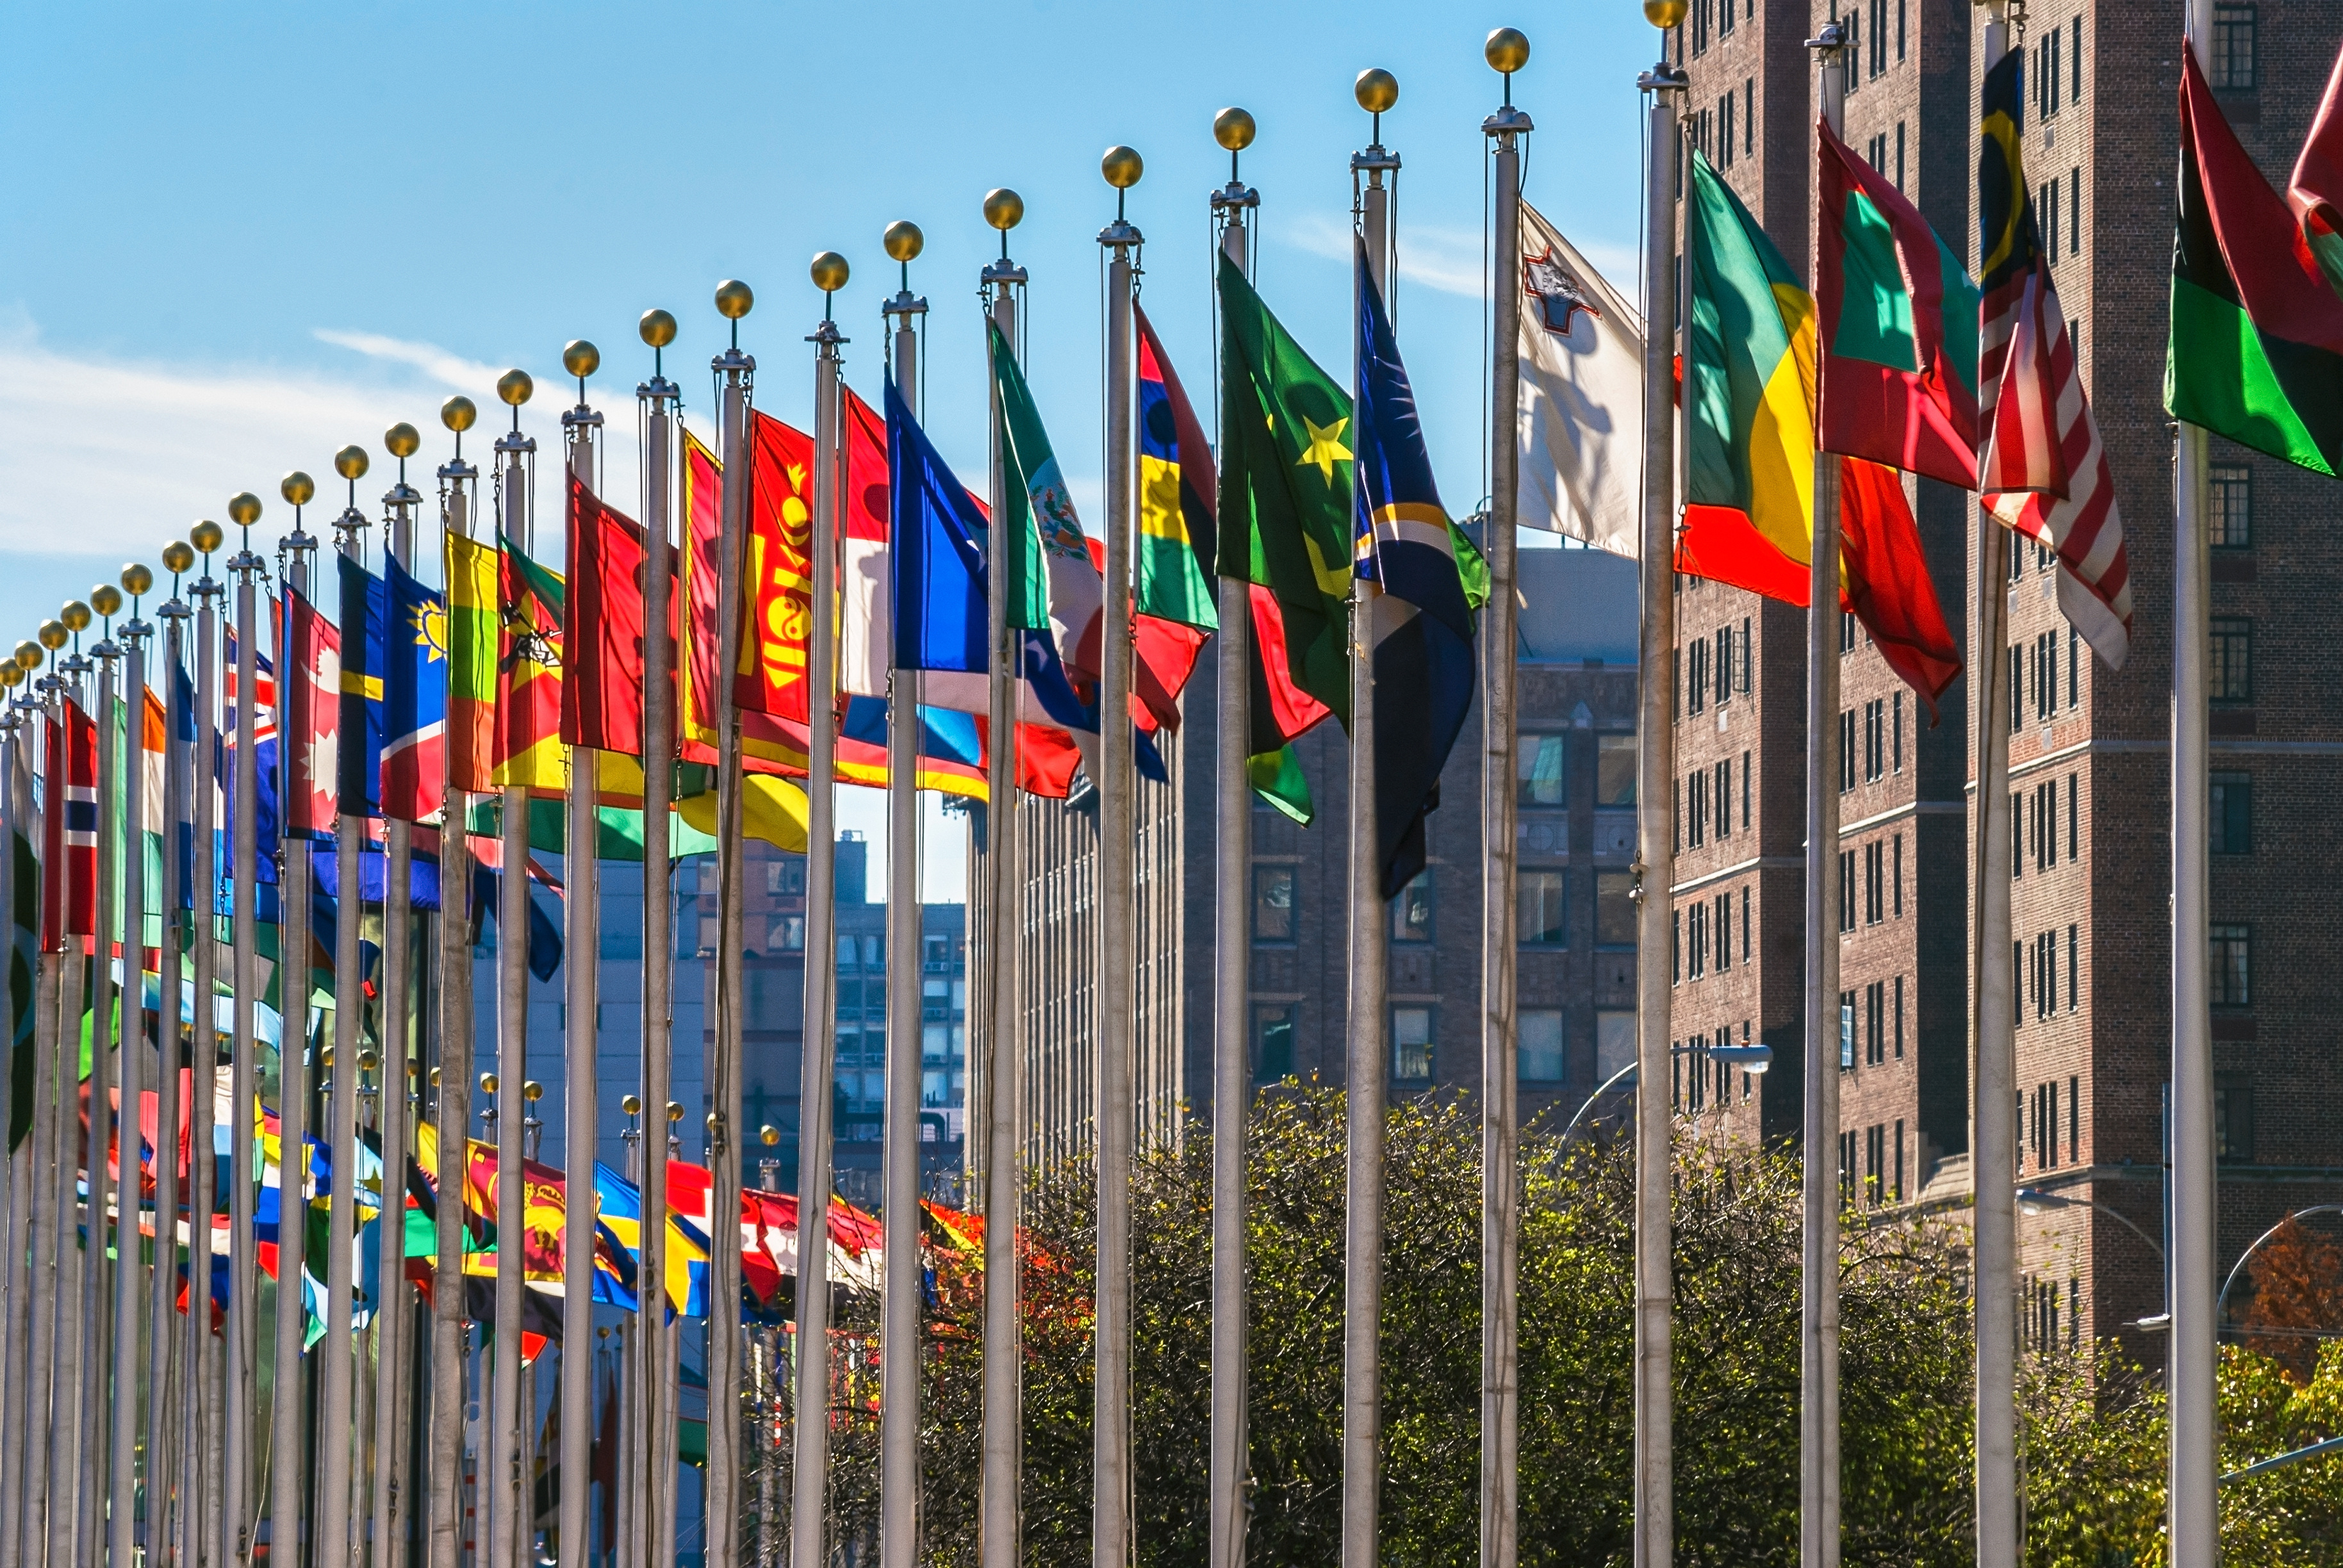 line of world countries' flags on poles